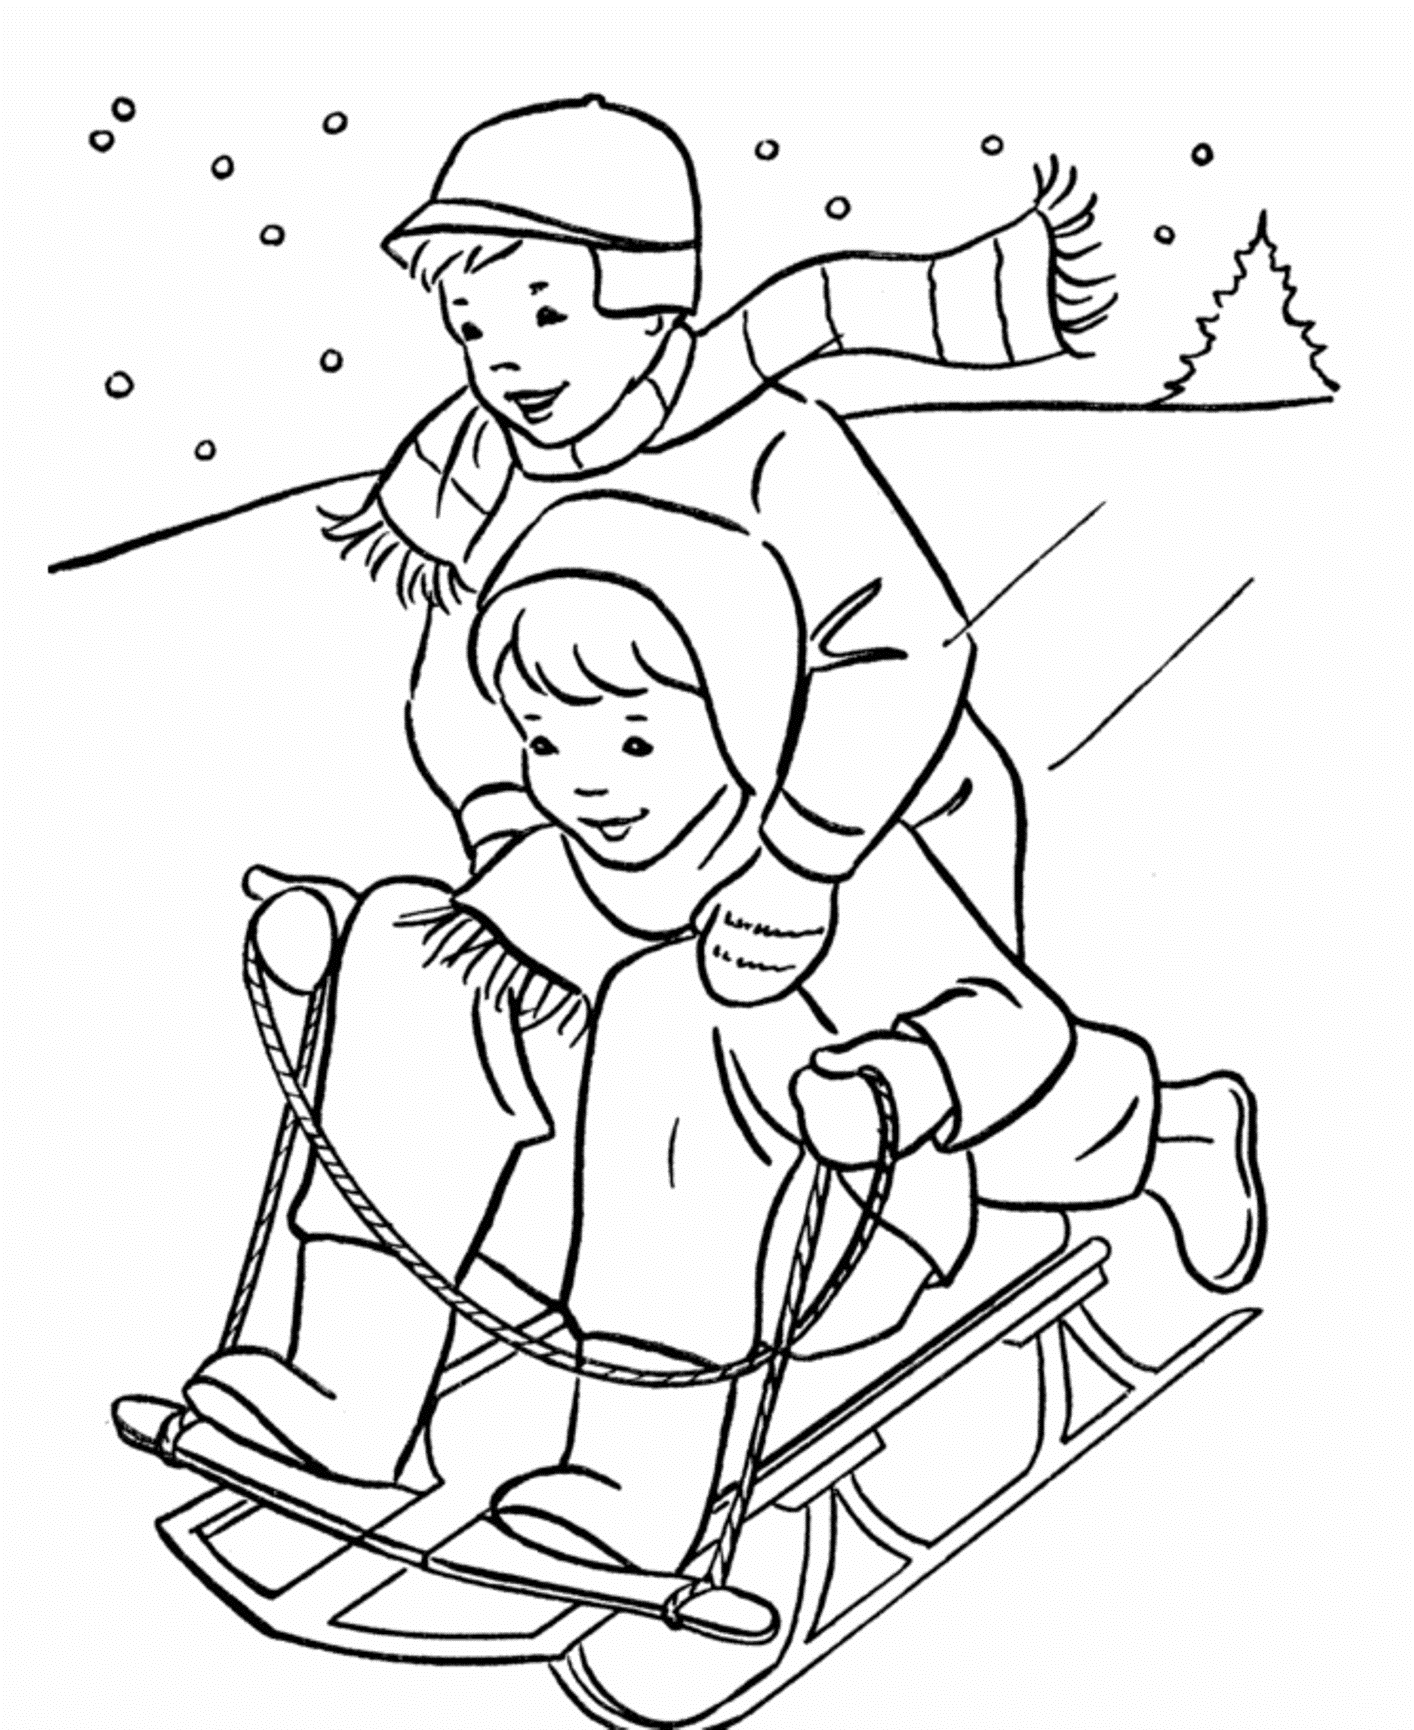 winter-sledding-coloring-pages-download-and-print-for-free